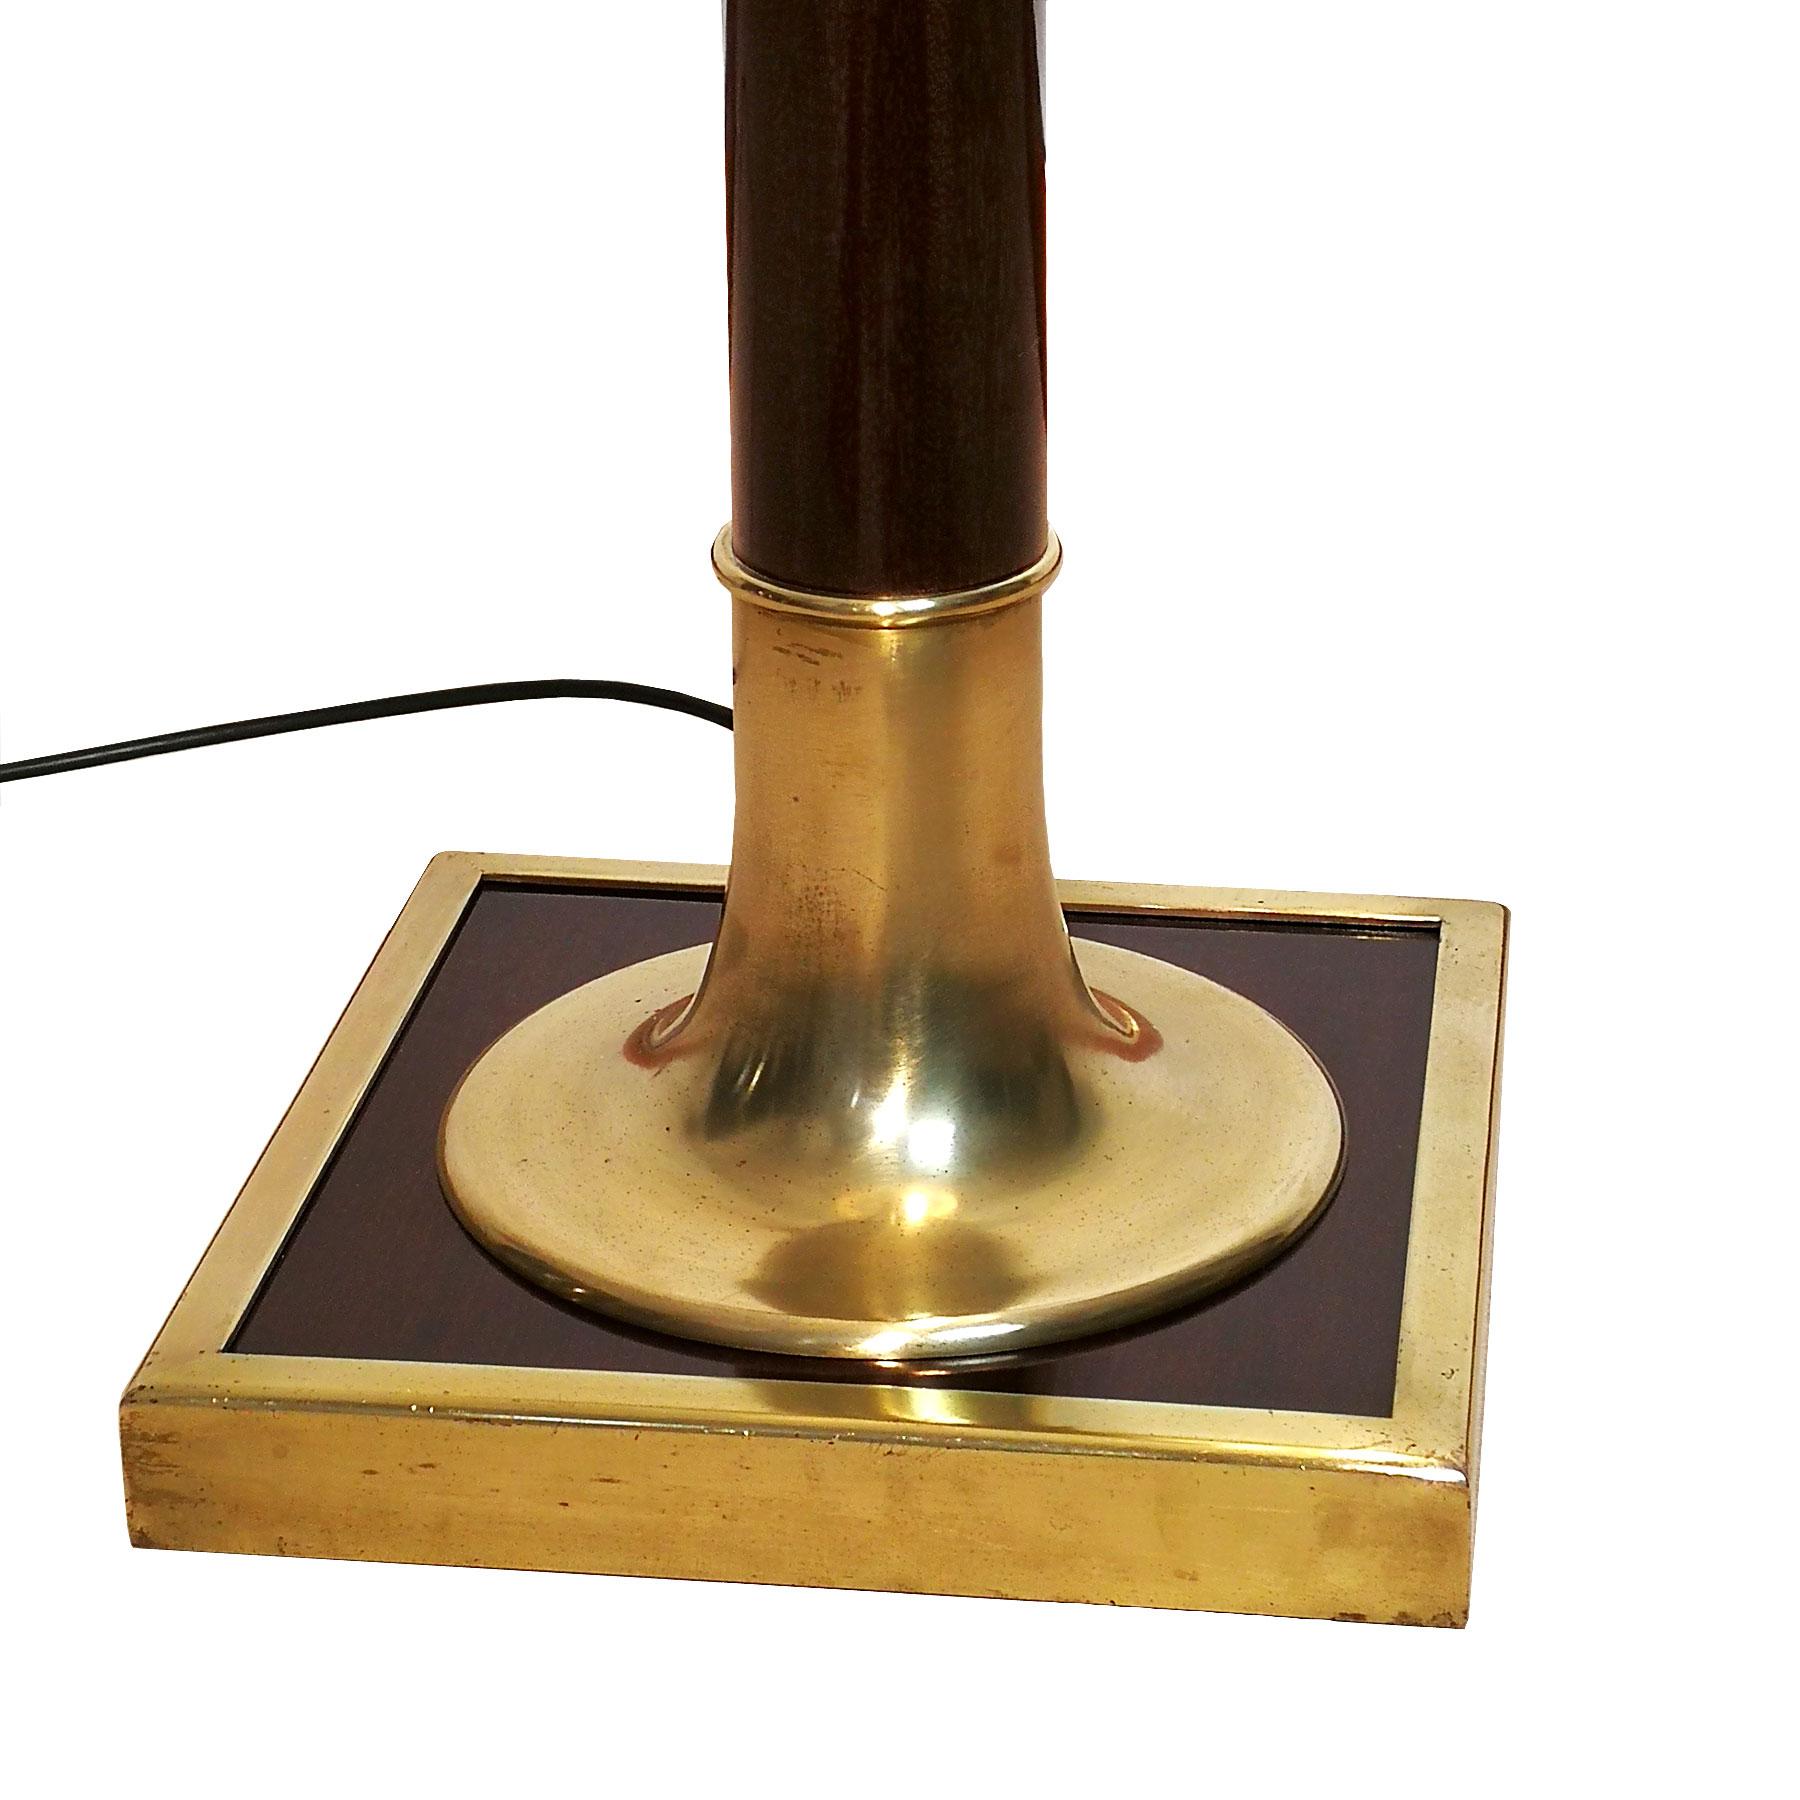 Mid-20th Century Mid-Century Modern Standing Lamp by Metalarte in Solid Mahogany, Brass - Spain For Sale